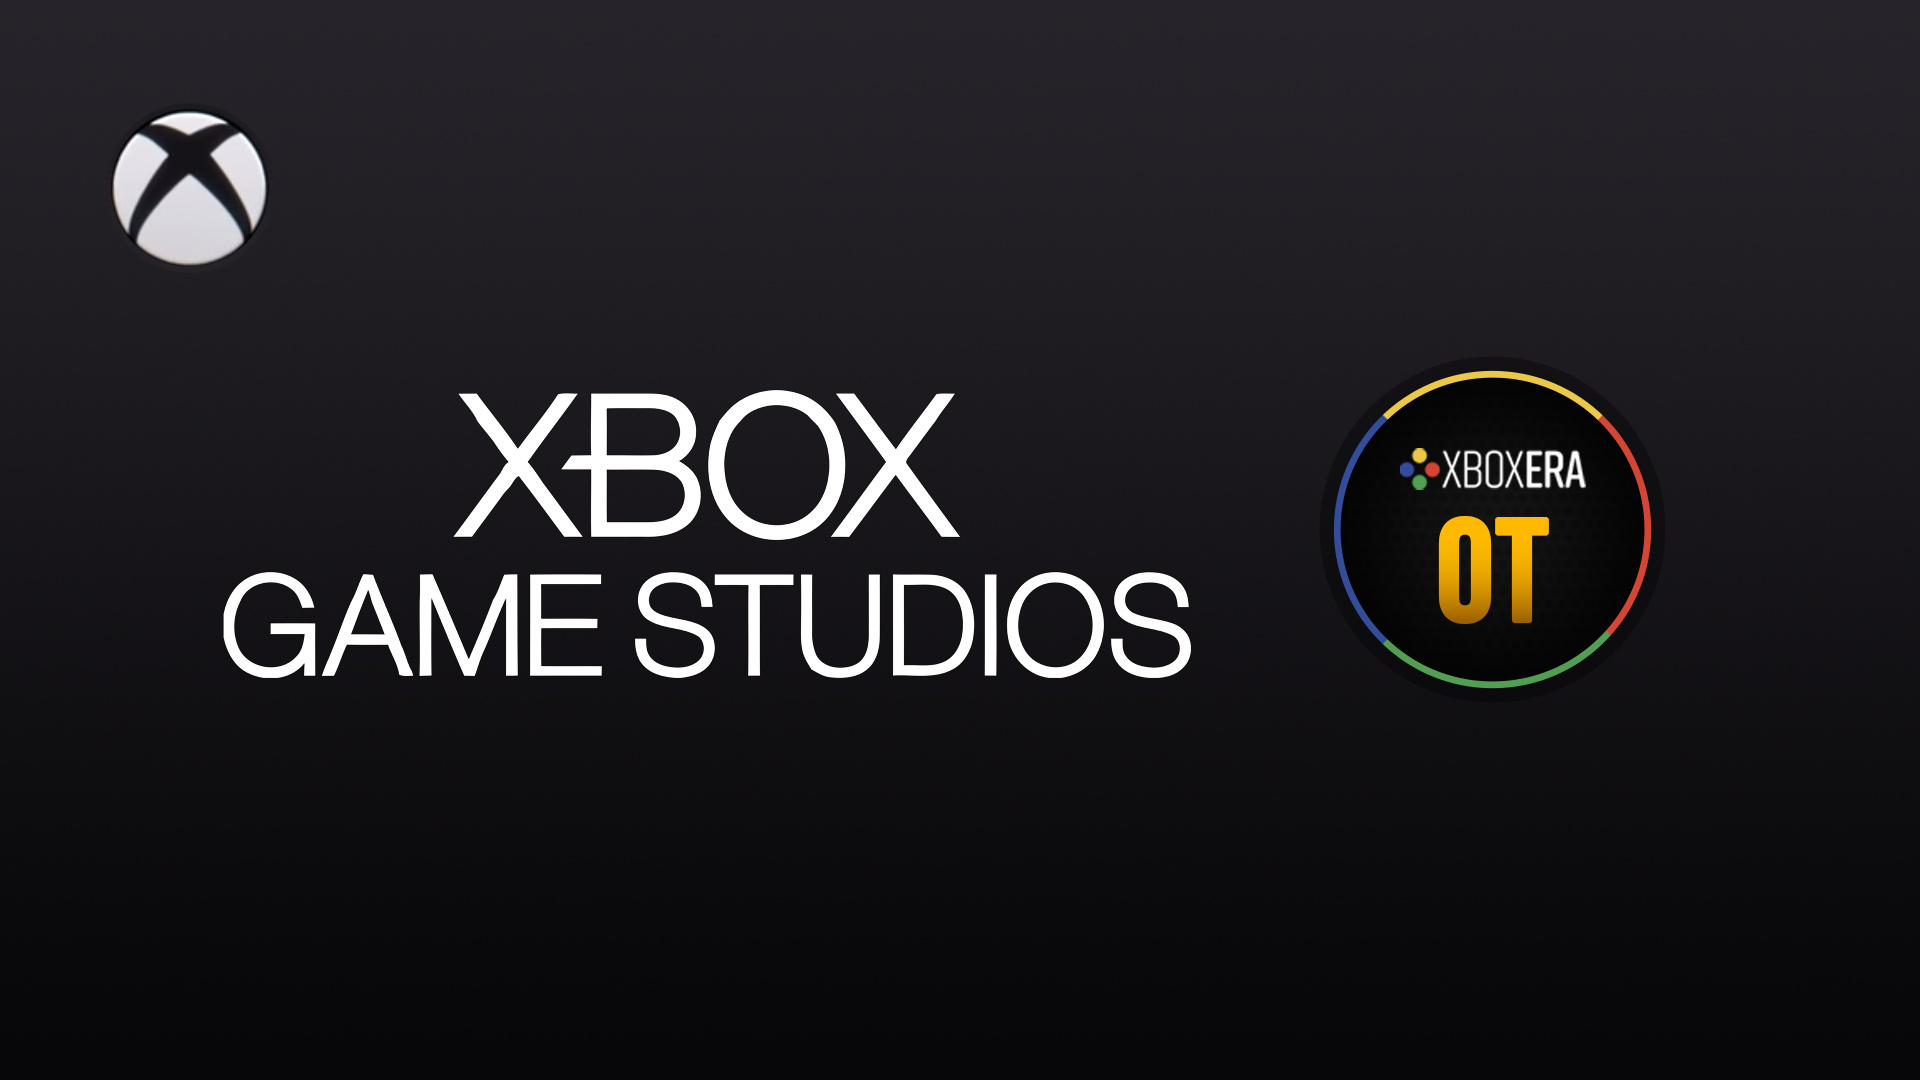 Xbox Game Studios OT Halois it me you're looking for 